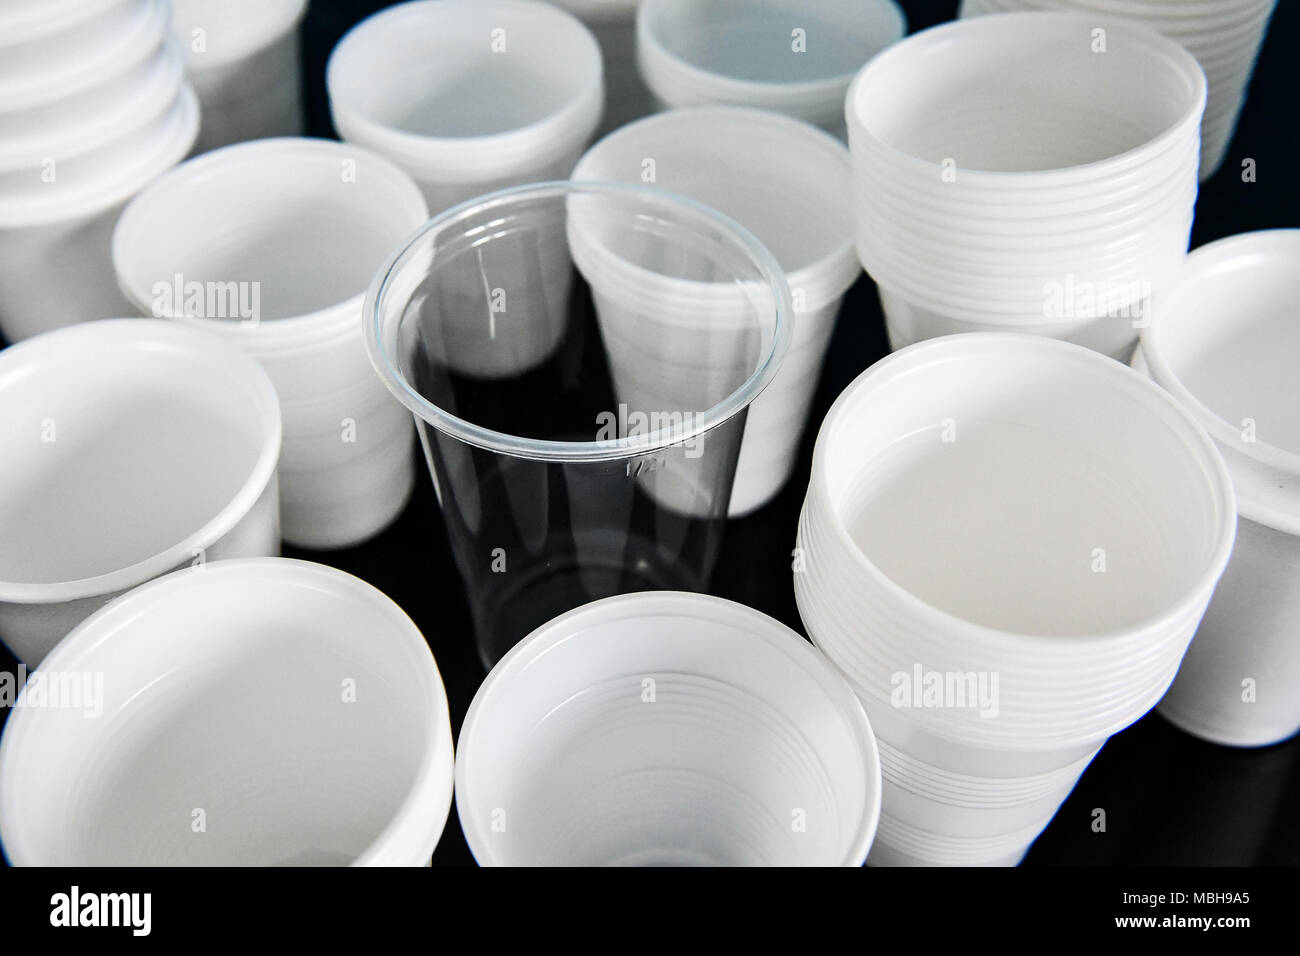 Disposable drinking cups. While NHS trusts across the country opened up about the scale of disposable cup use, Government departments were less forthcoming. Stock Photo